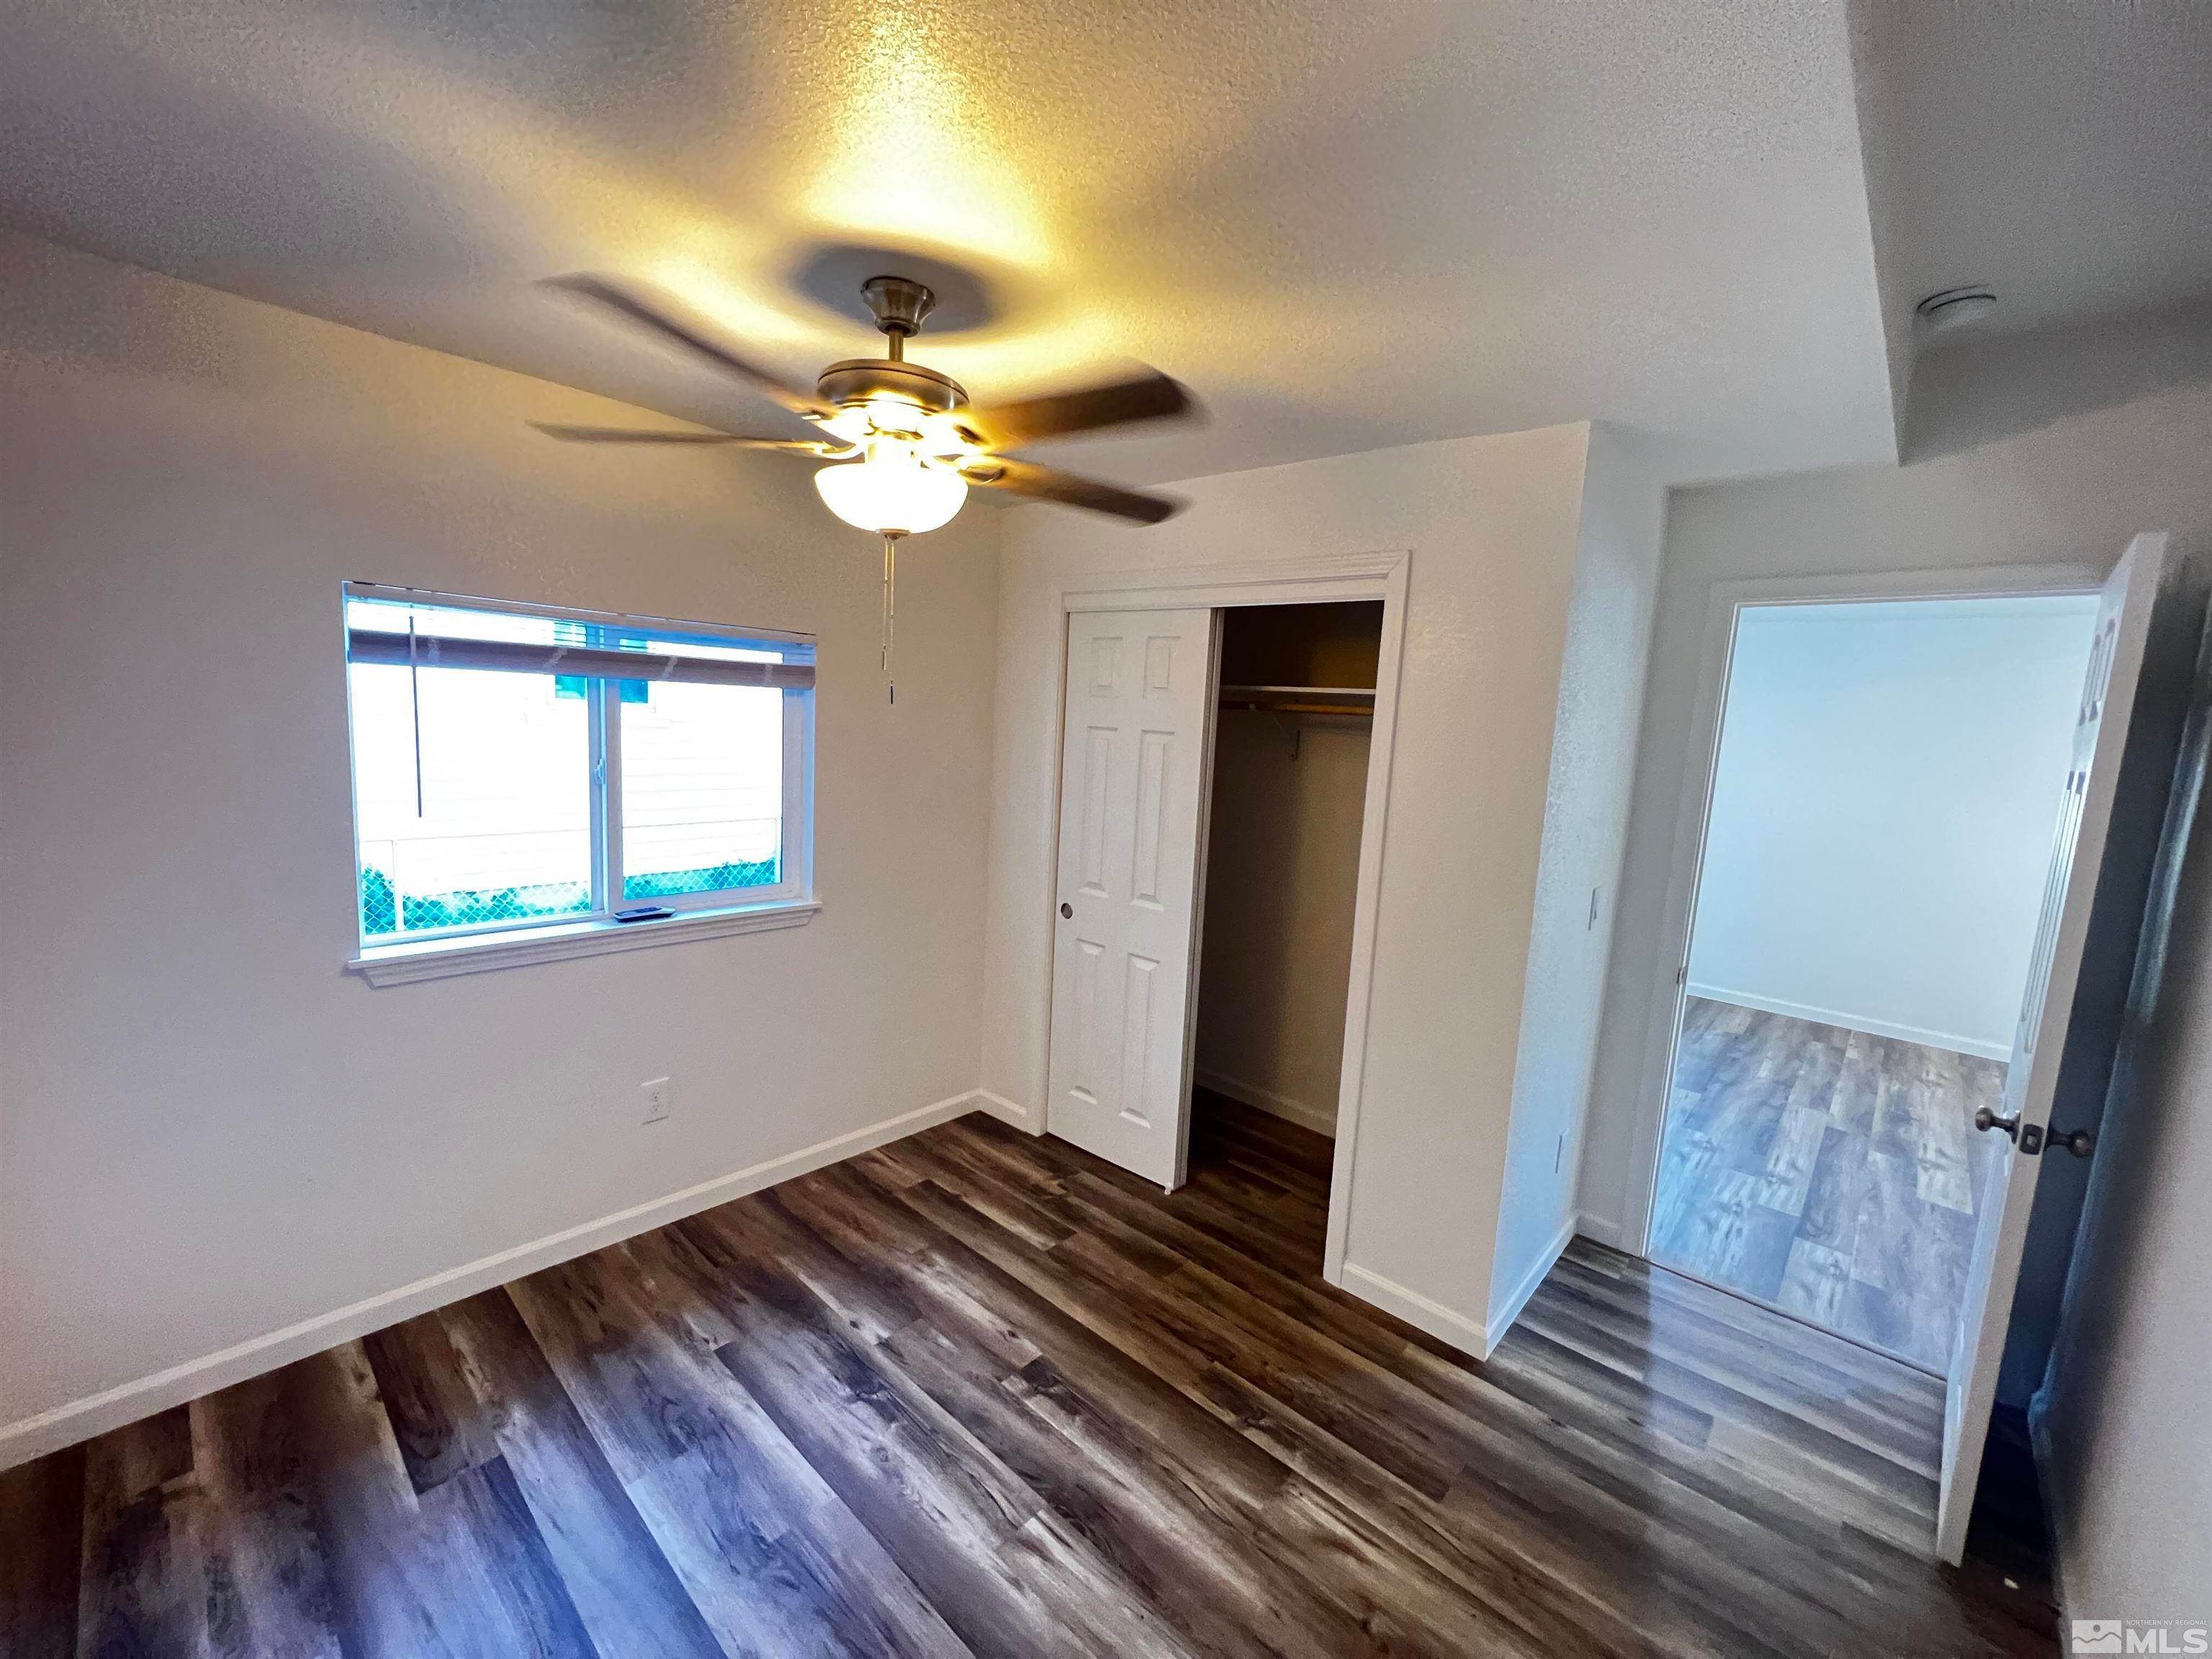 3. Duplex / Multiplex for Active at 860/862/85 Quincy Street Reno, Nevada 89502 United States